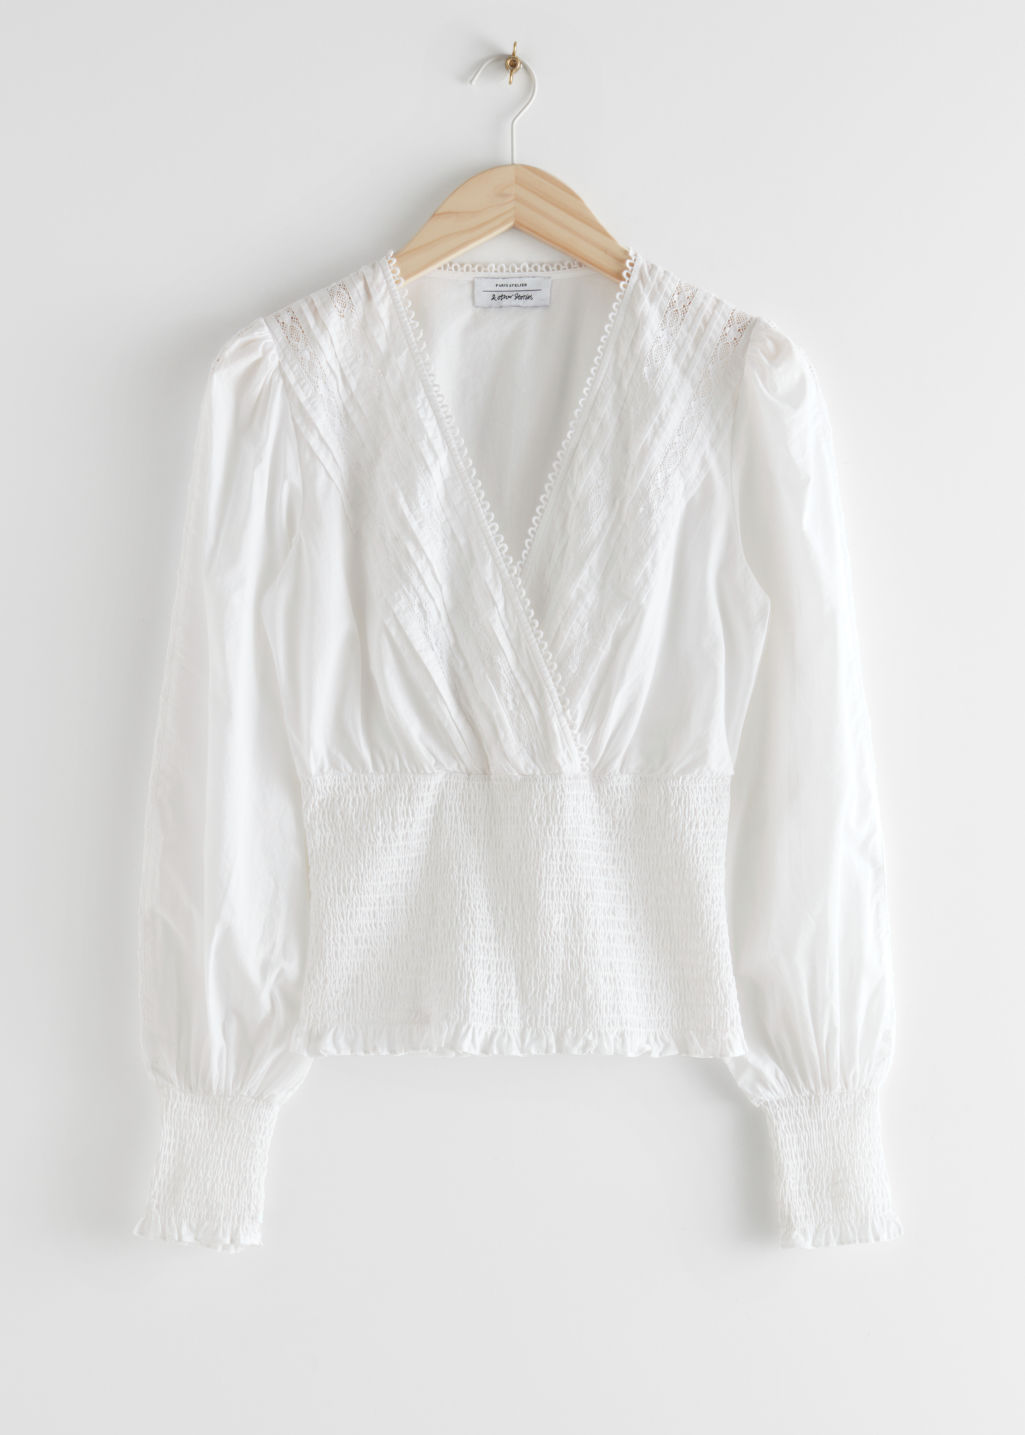 Smocked Lace Top - White - Blouses - & Other Stories